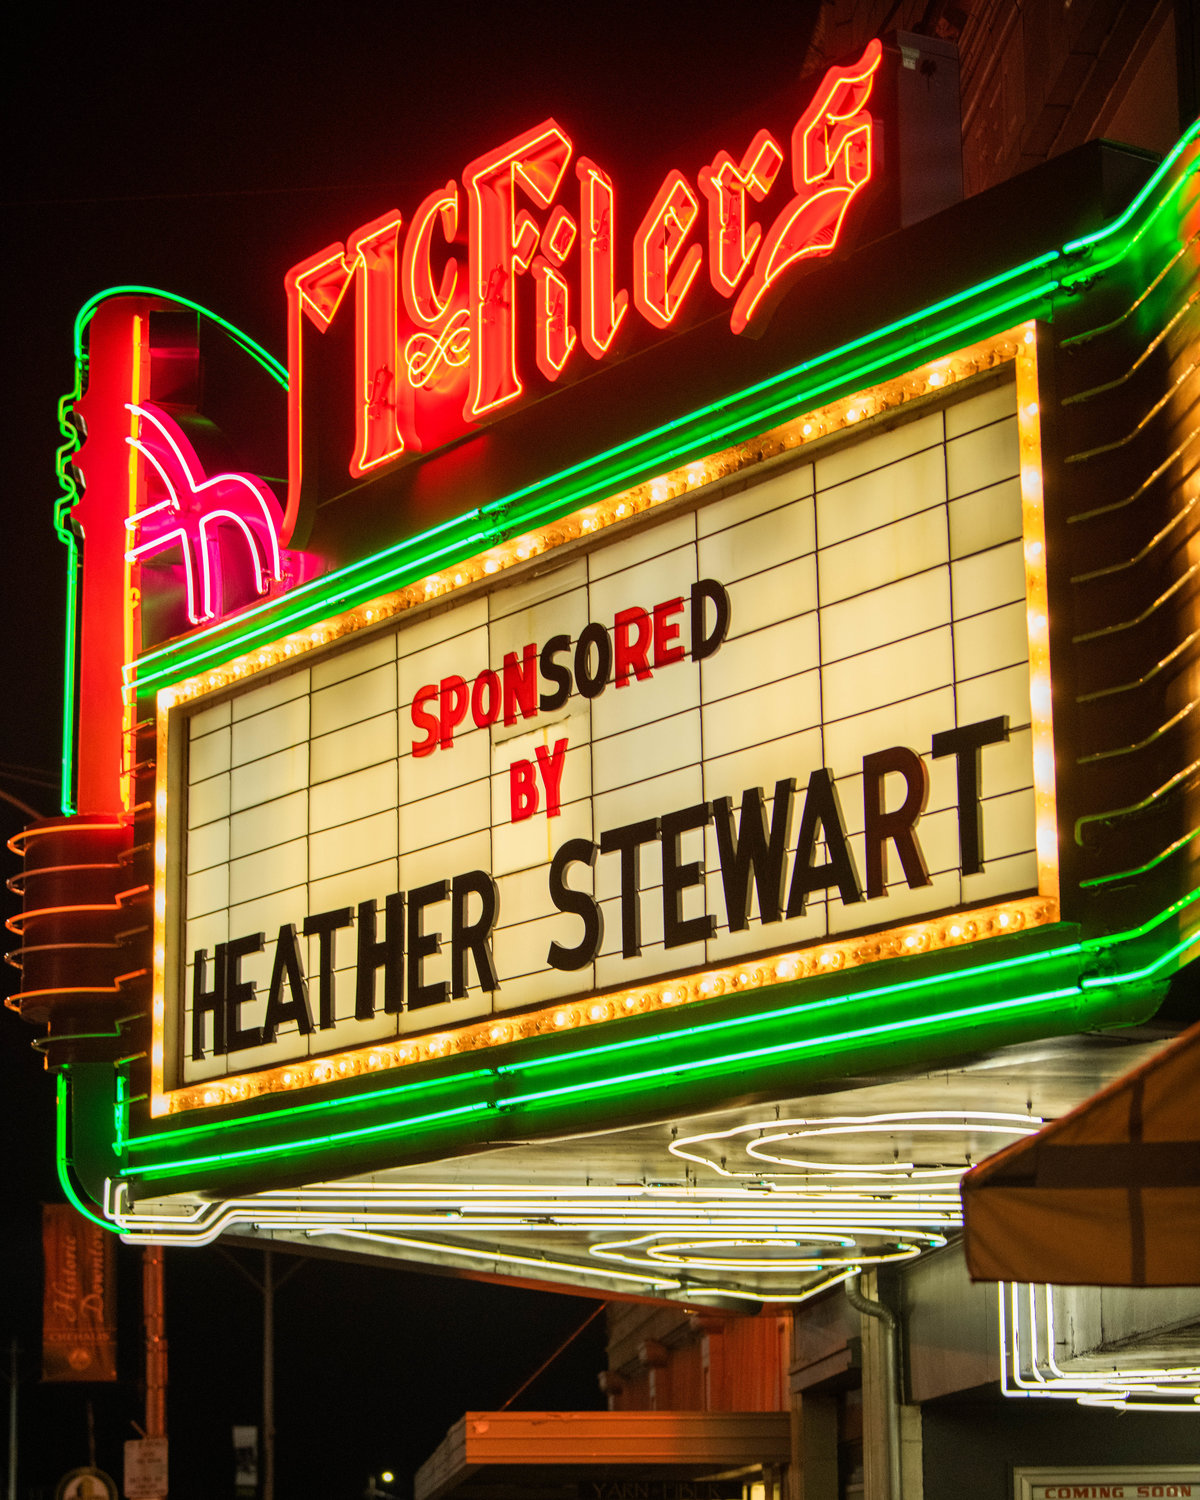 The sold out comedy show was sponsored by Heather Stewart Friday night at the McFiler’s Chehalis Theater.